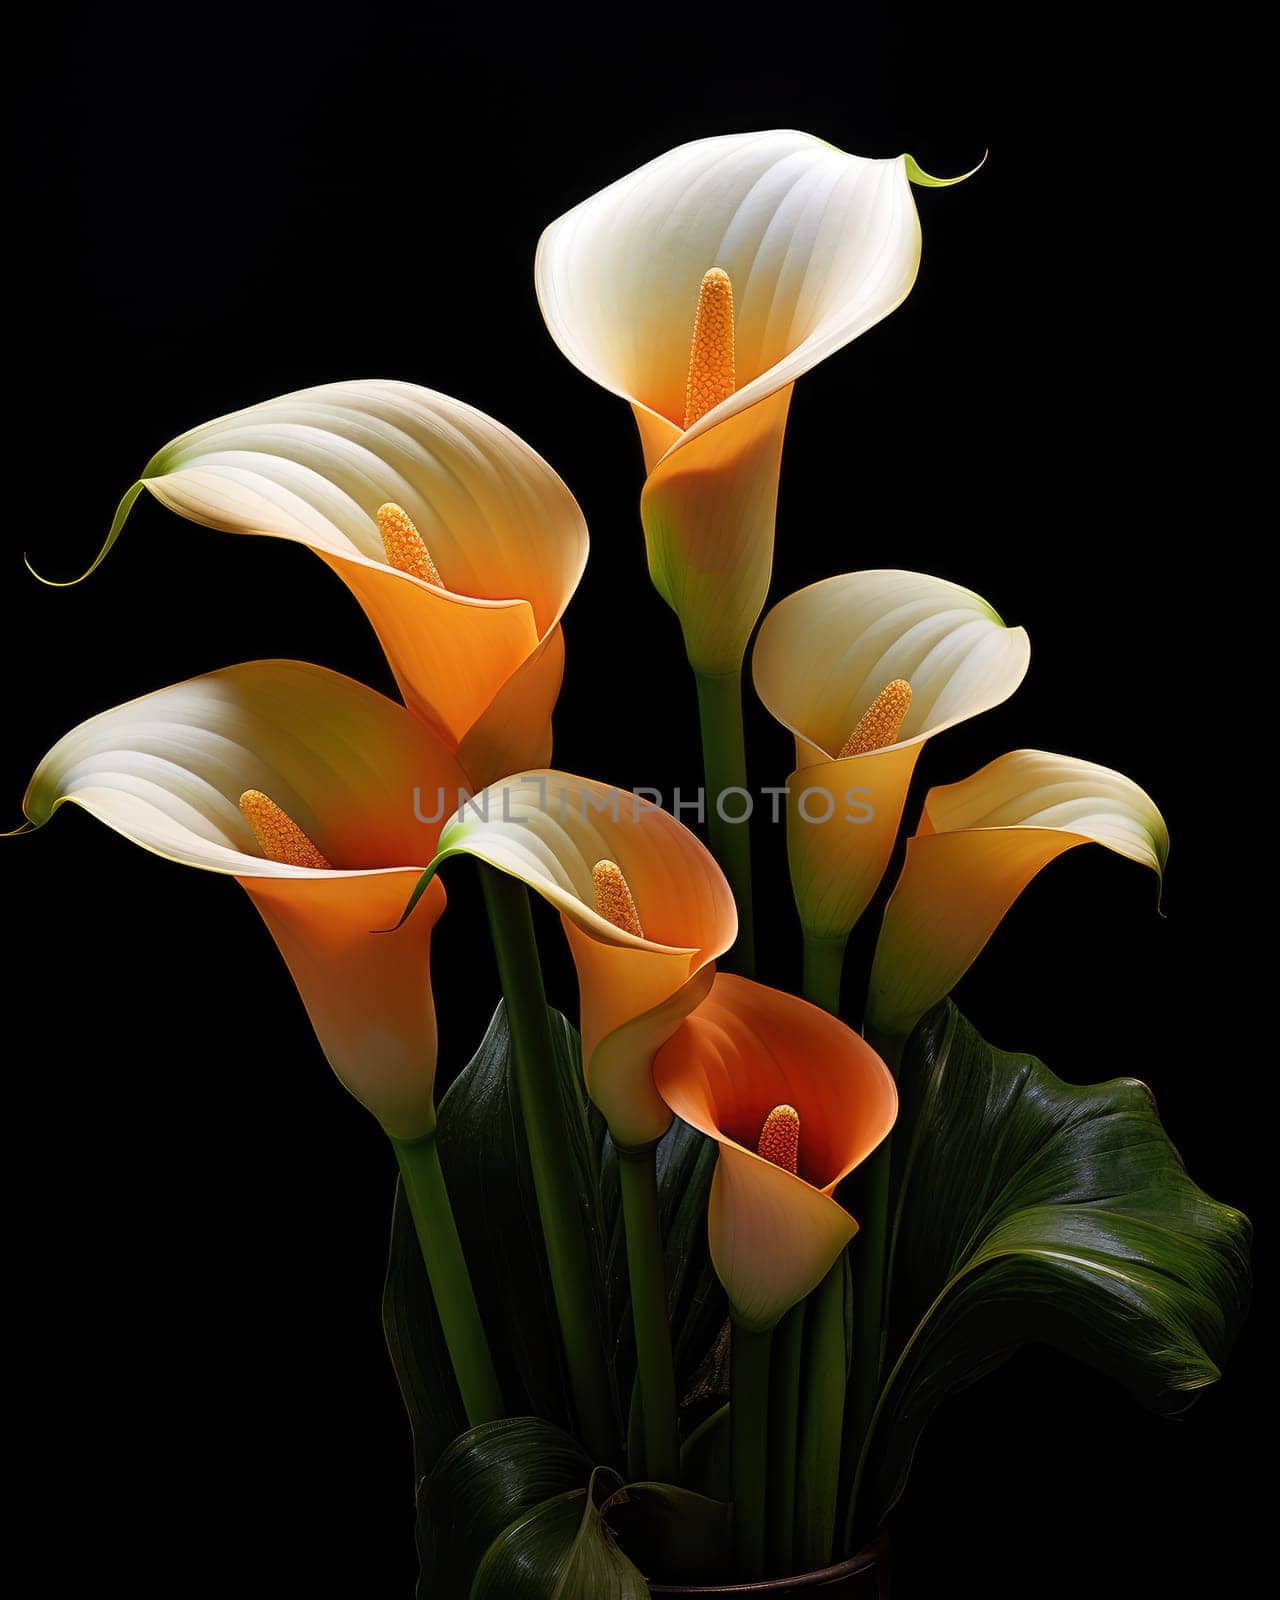 Romantic bouquet of calla lilies in minimalistic style on a dark background